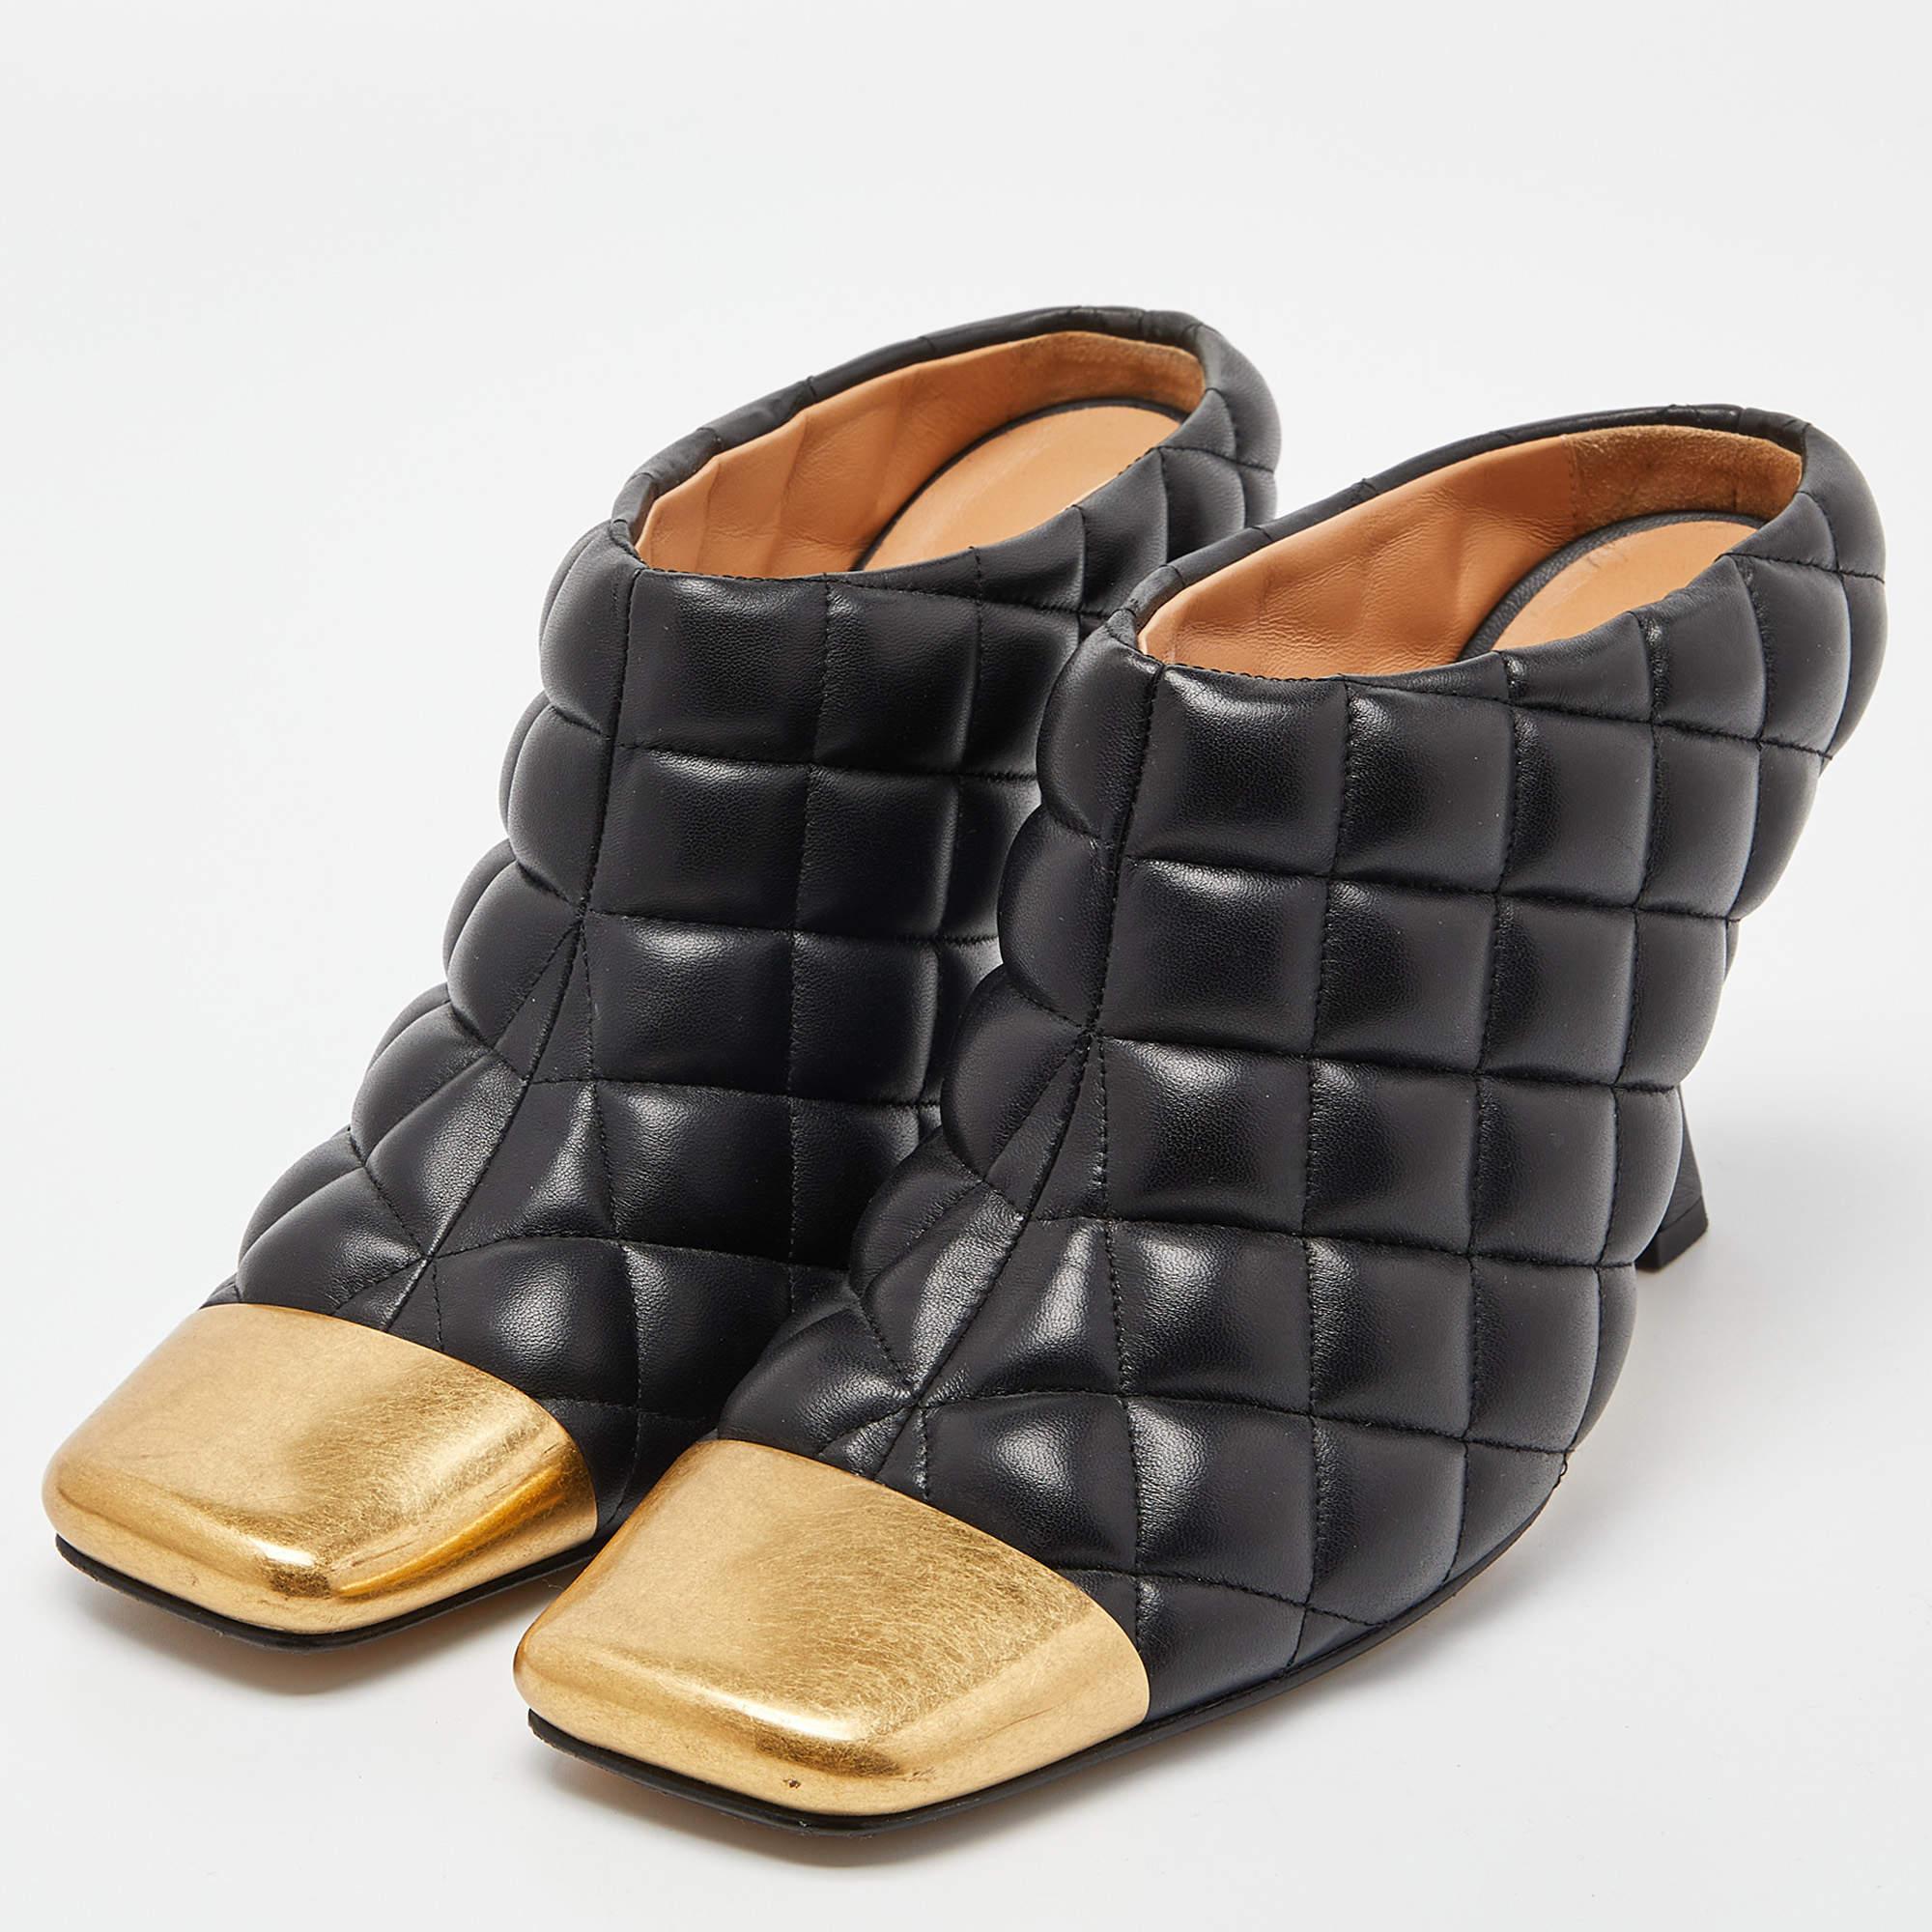 Deliver statement looks with these mules from Bottega Veneta! From their shape and detailing to their overall appeal, they exude elegance. The mules feature a padded leather construction with gold-tone cap toes and 9 cm heels.

